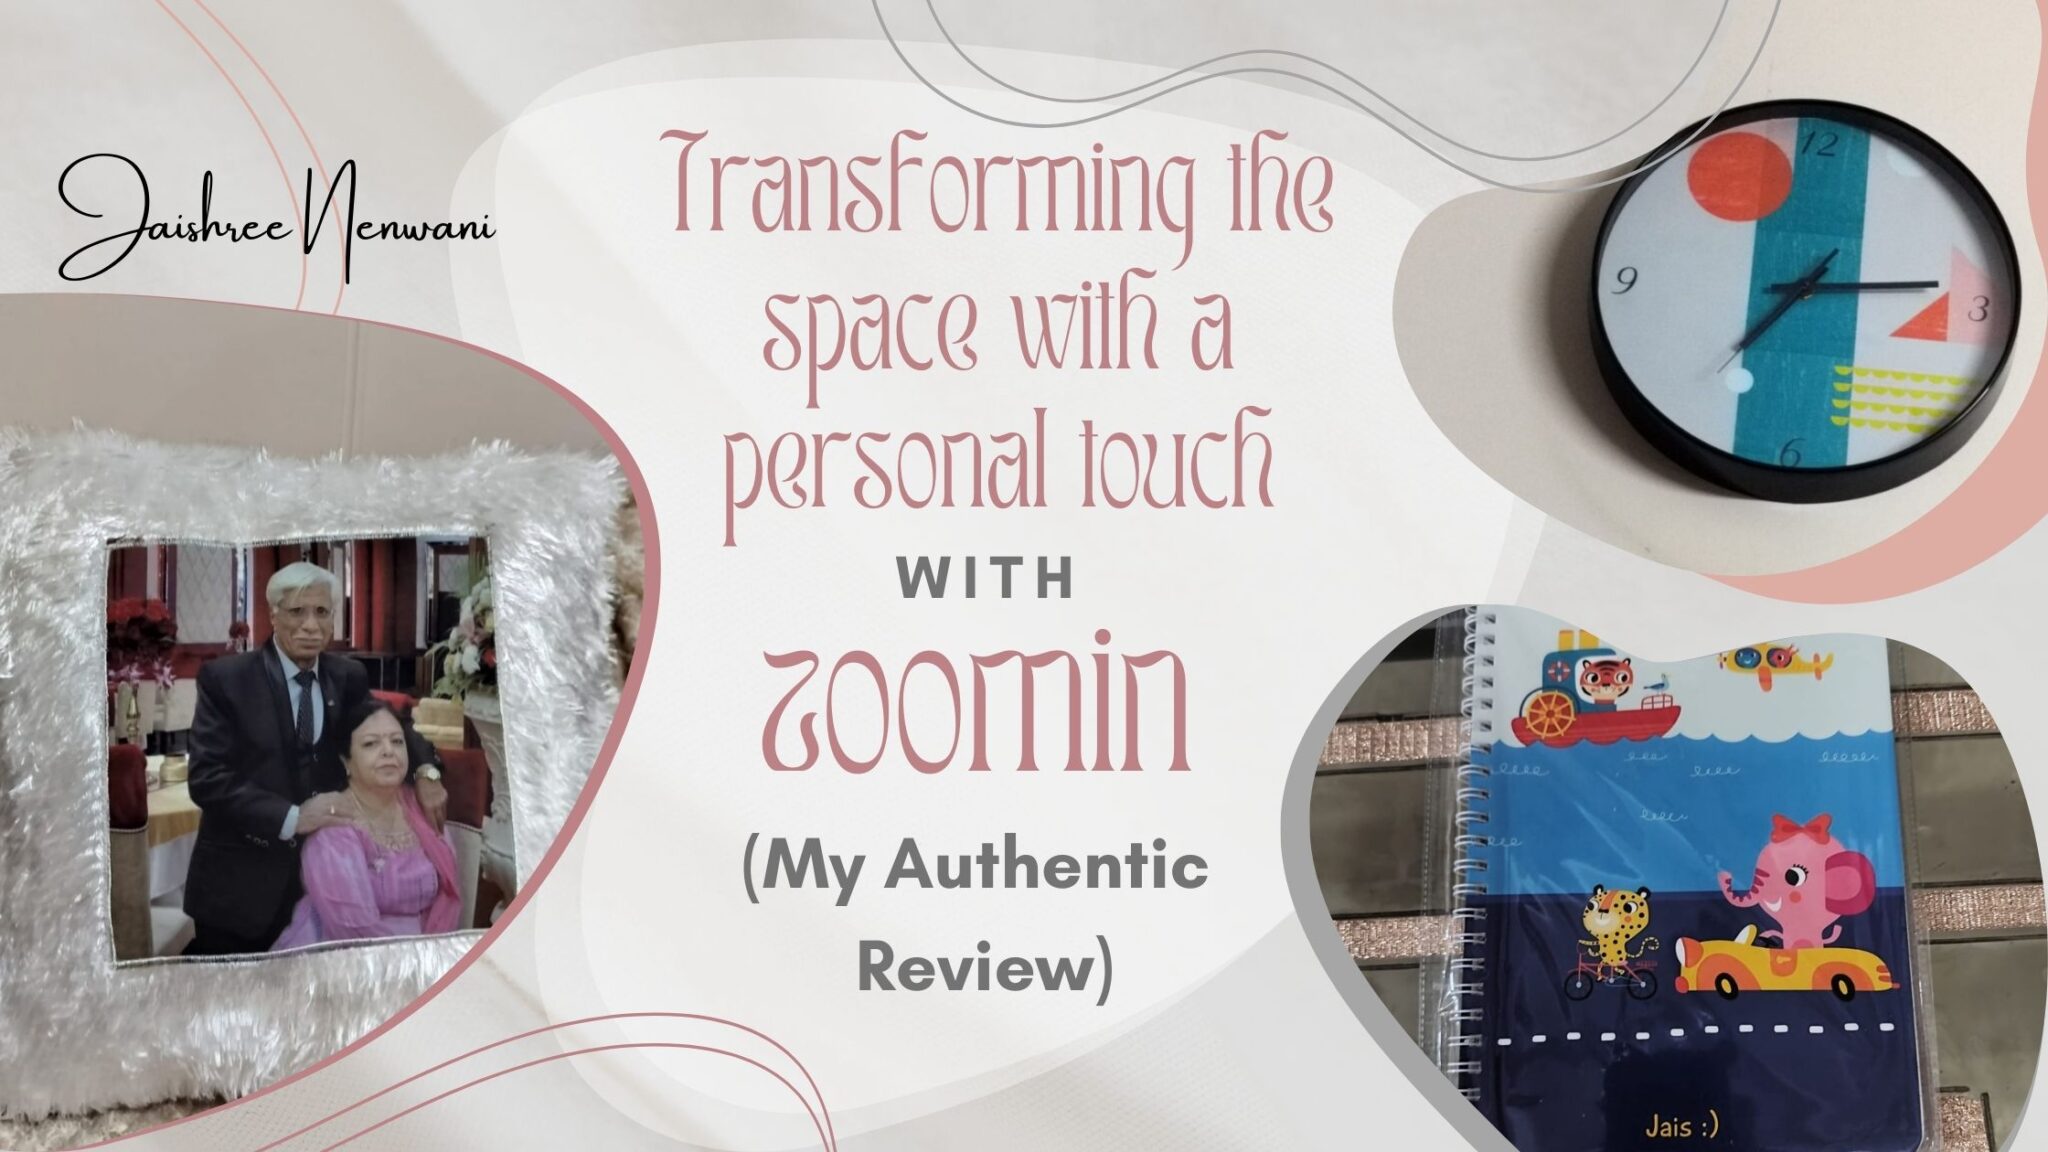 Transforming Space with a Personal Touch - My Experience Zoomin.com